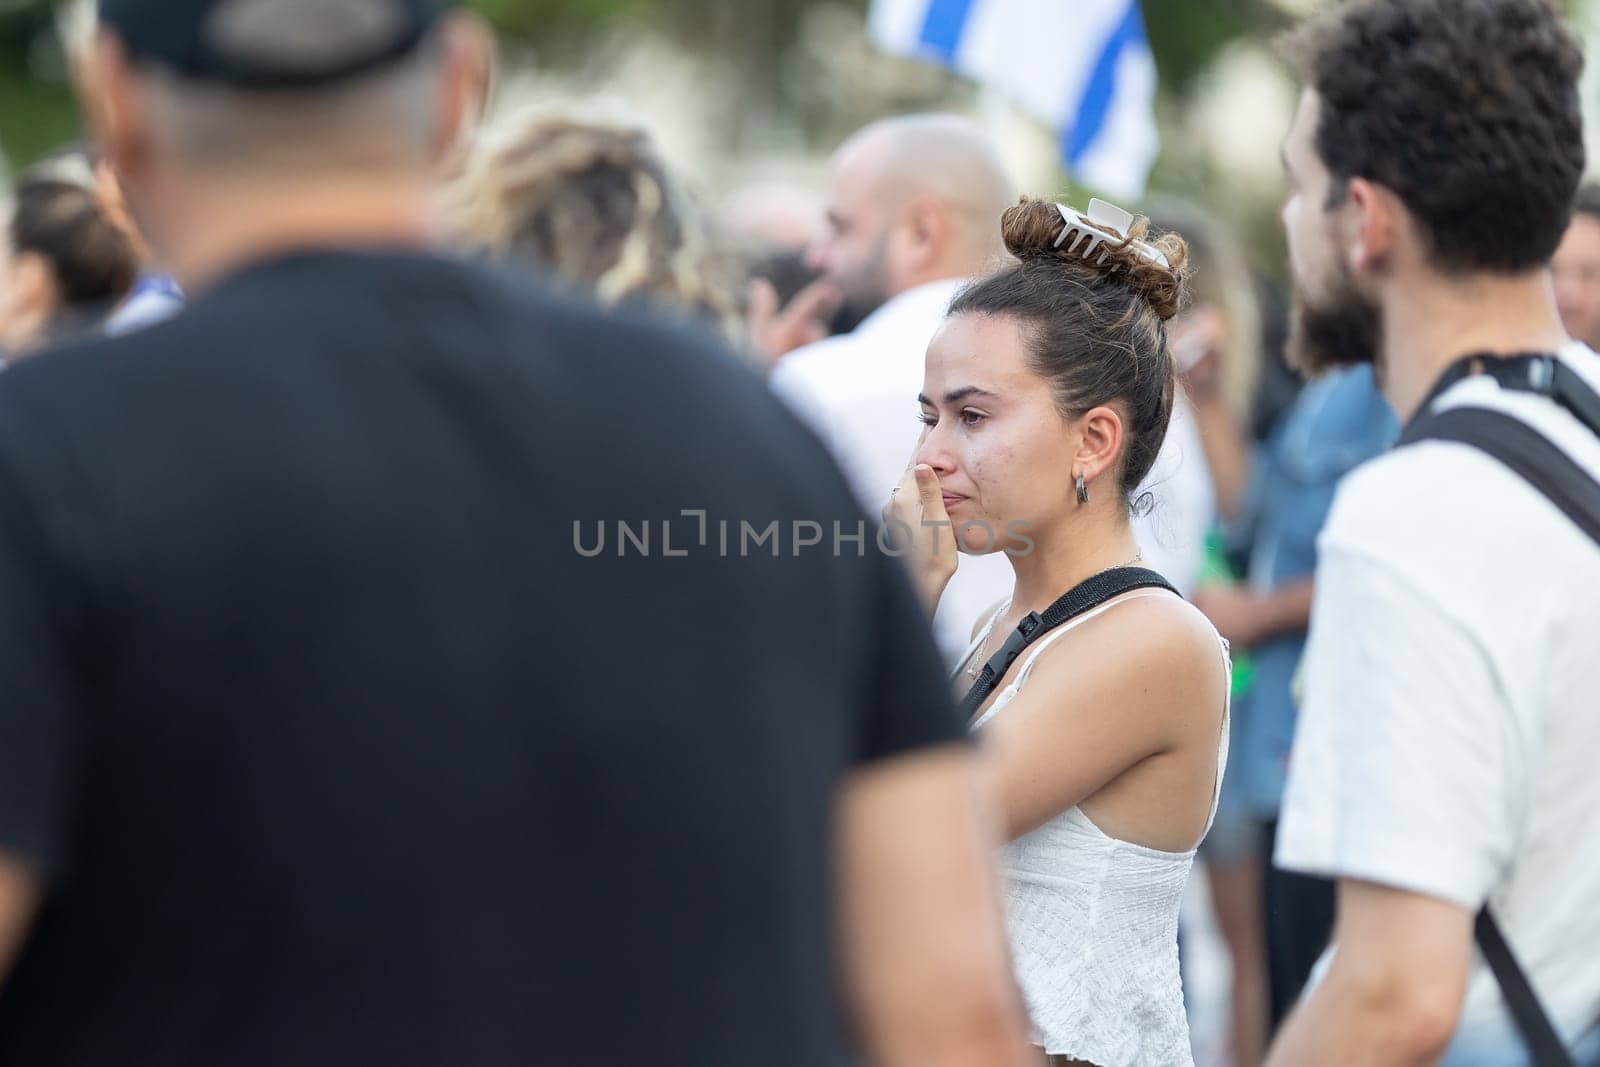 Lisbon, Portugal, October 10, 2023, A woman cries at a rally in support of Israel. Mid. shot